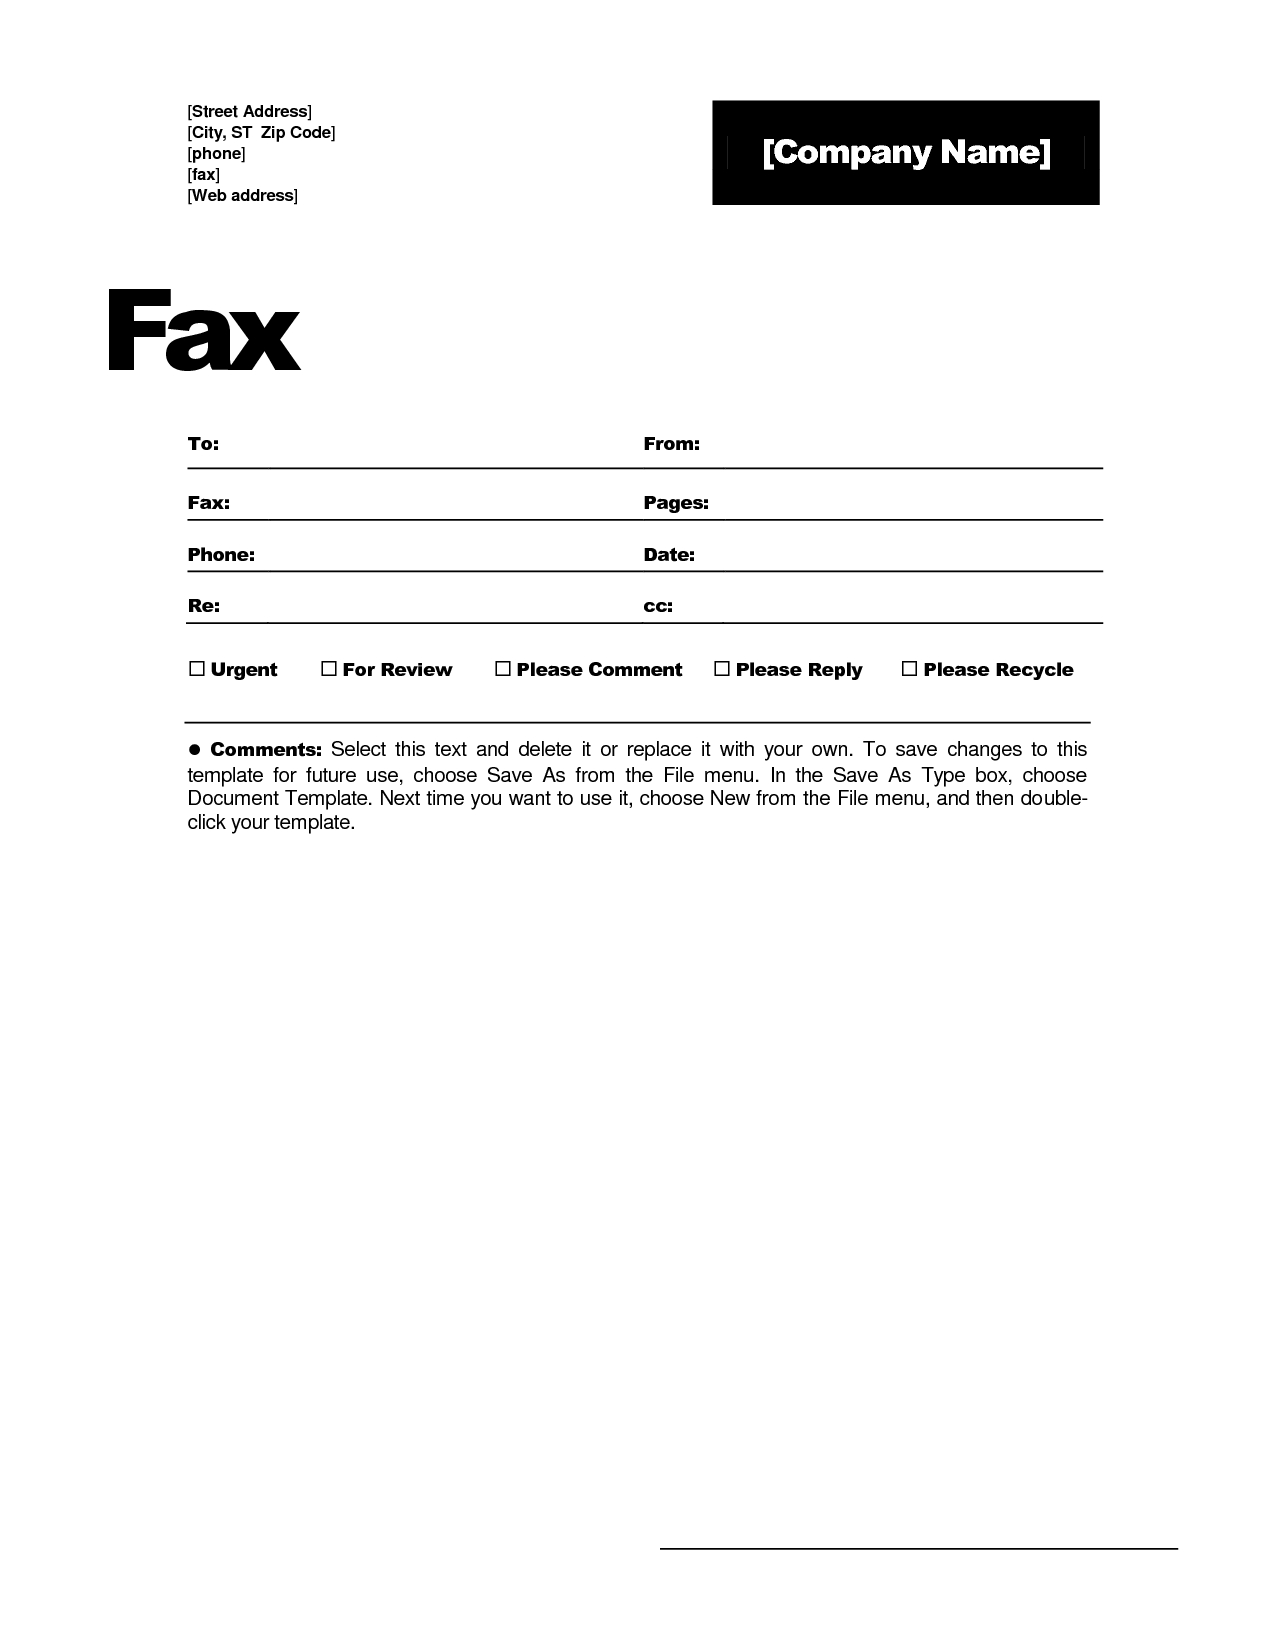 Best Photos Of Fax Templates Microsoft Word 2010 - Fax Cover Regarding Fax Template Word 2010